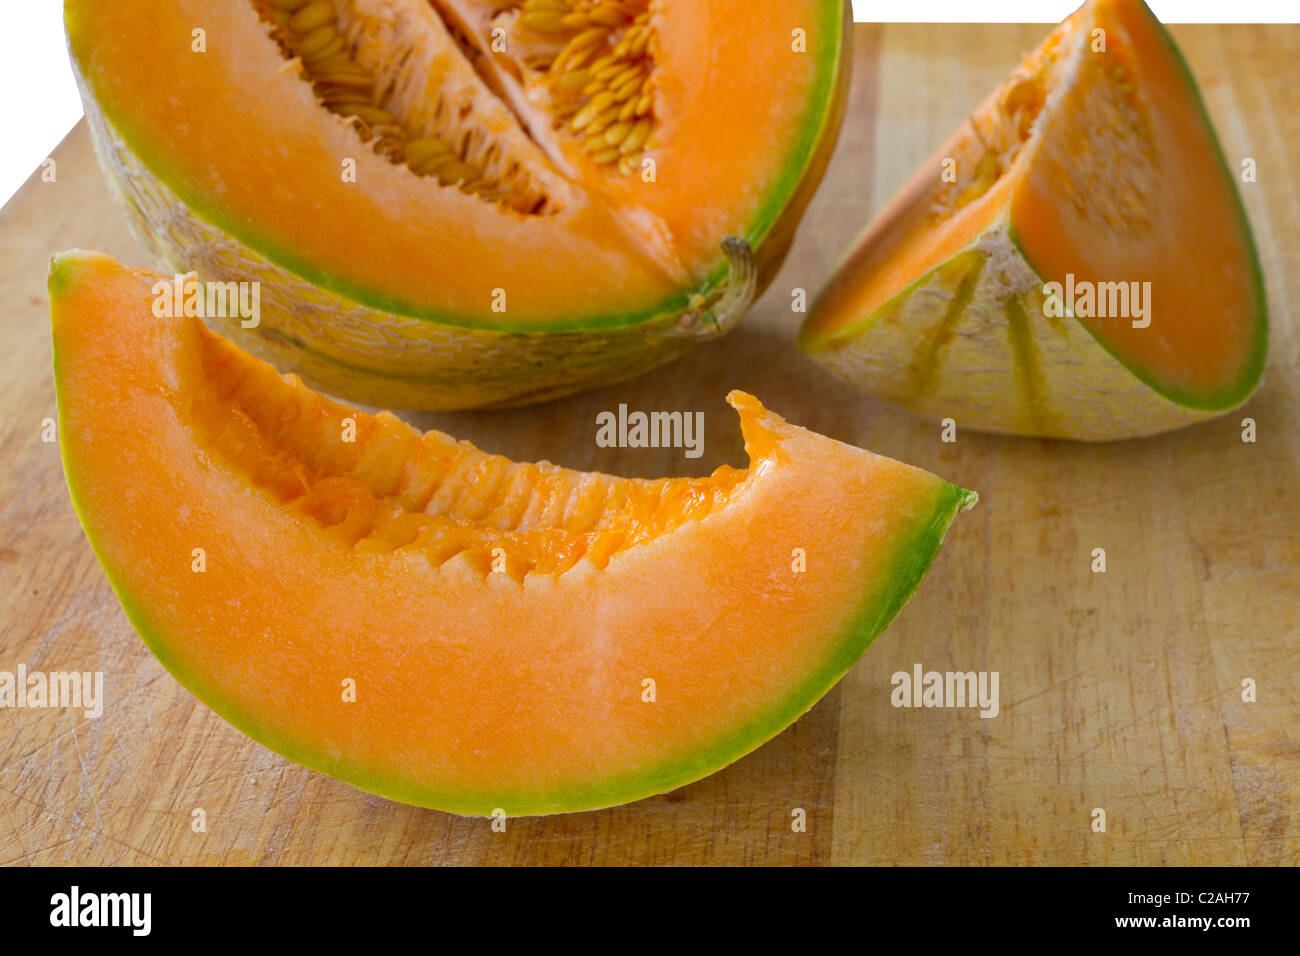 sliced piece of fresh orange cantaloupe melon on wooden carving board Stock Photo